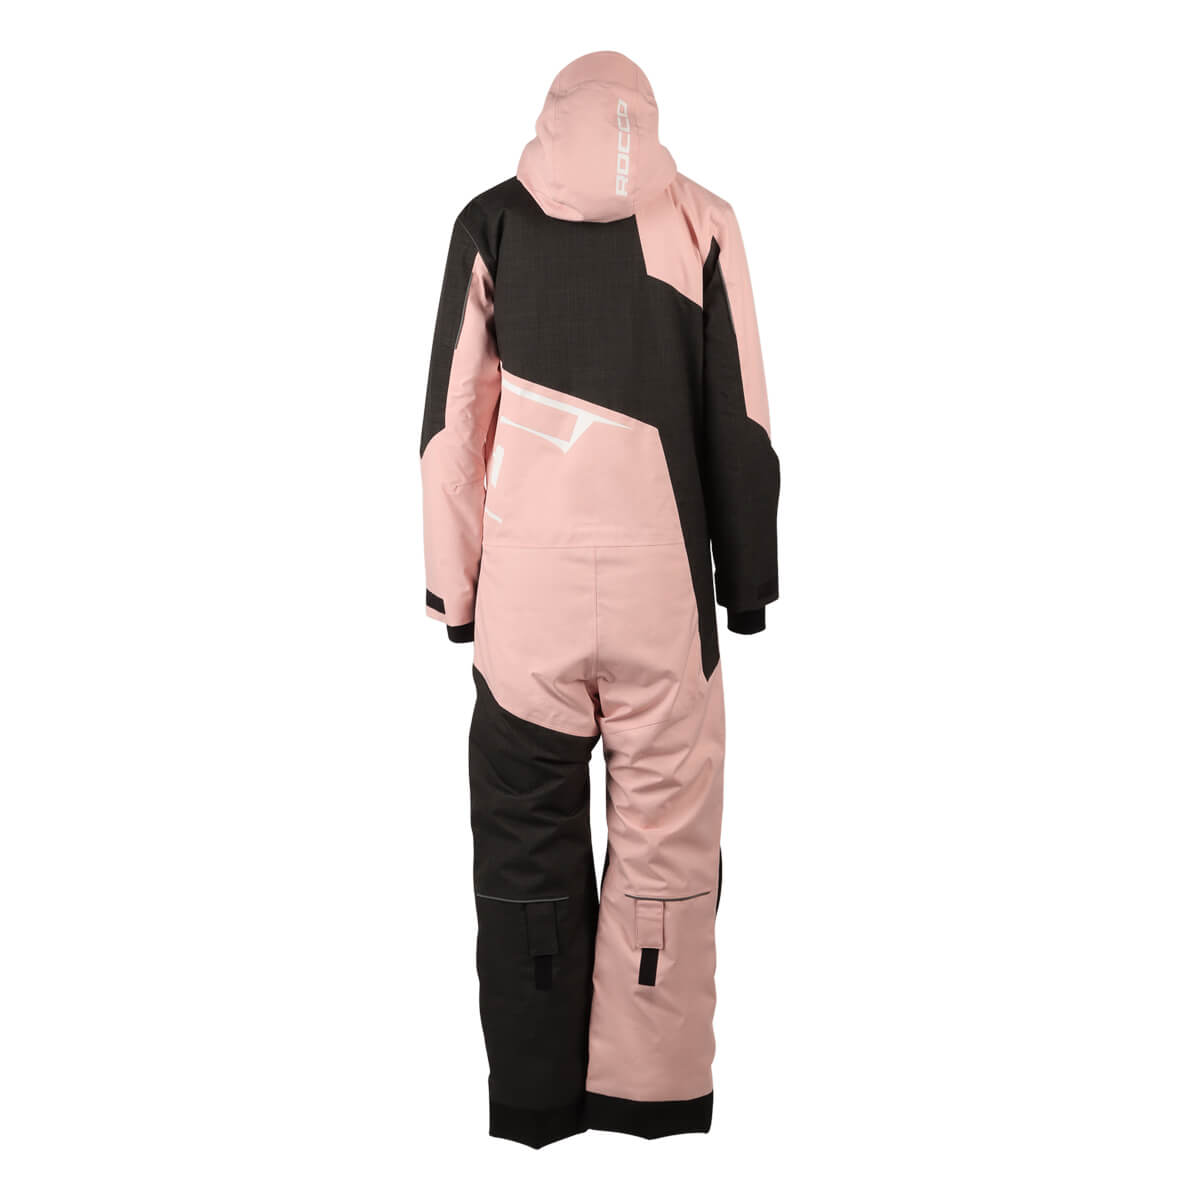 SALES SAMPLE: 509 Youth Rocco Mono Suit - Dusty Rose Youth Large/Size 12